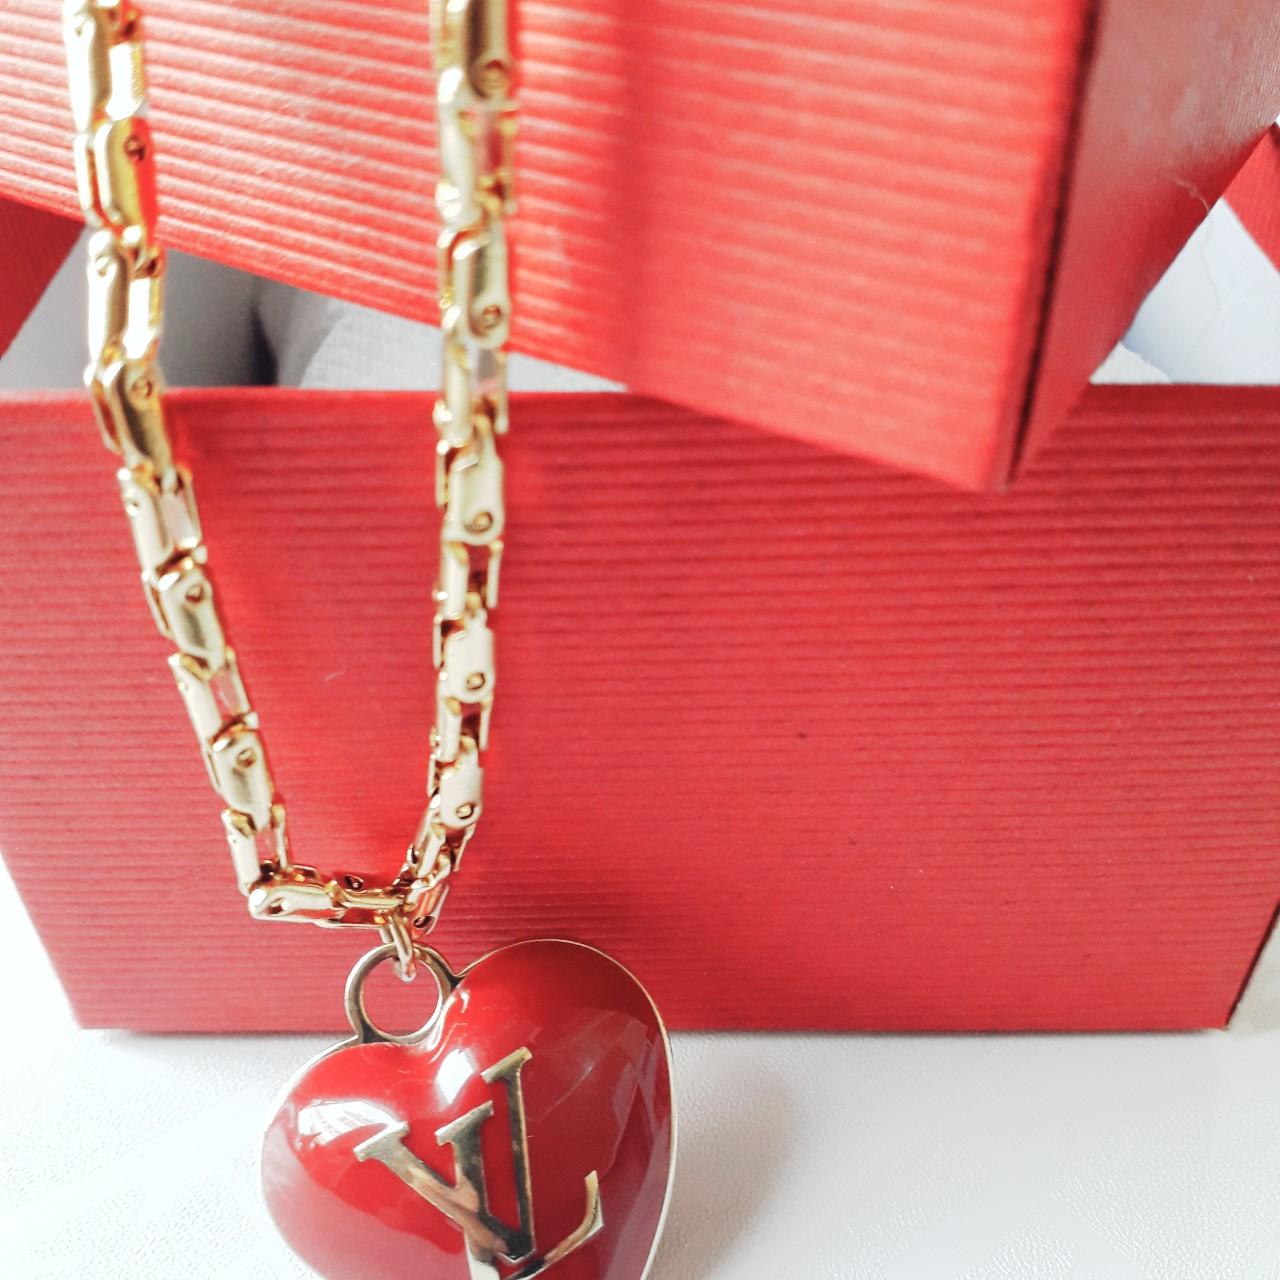 Louis Vuitton, Jewelry, Louis Vuitton Red Heart Necklace With Lv Stamp On  Heart Very Rare